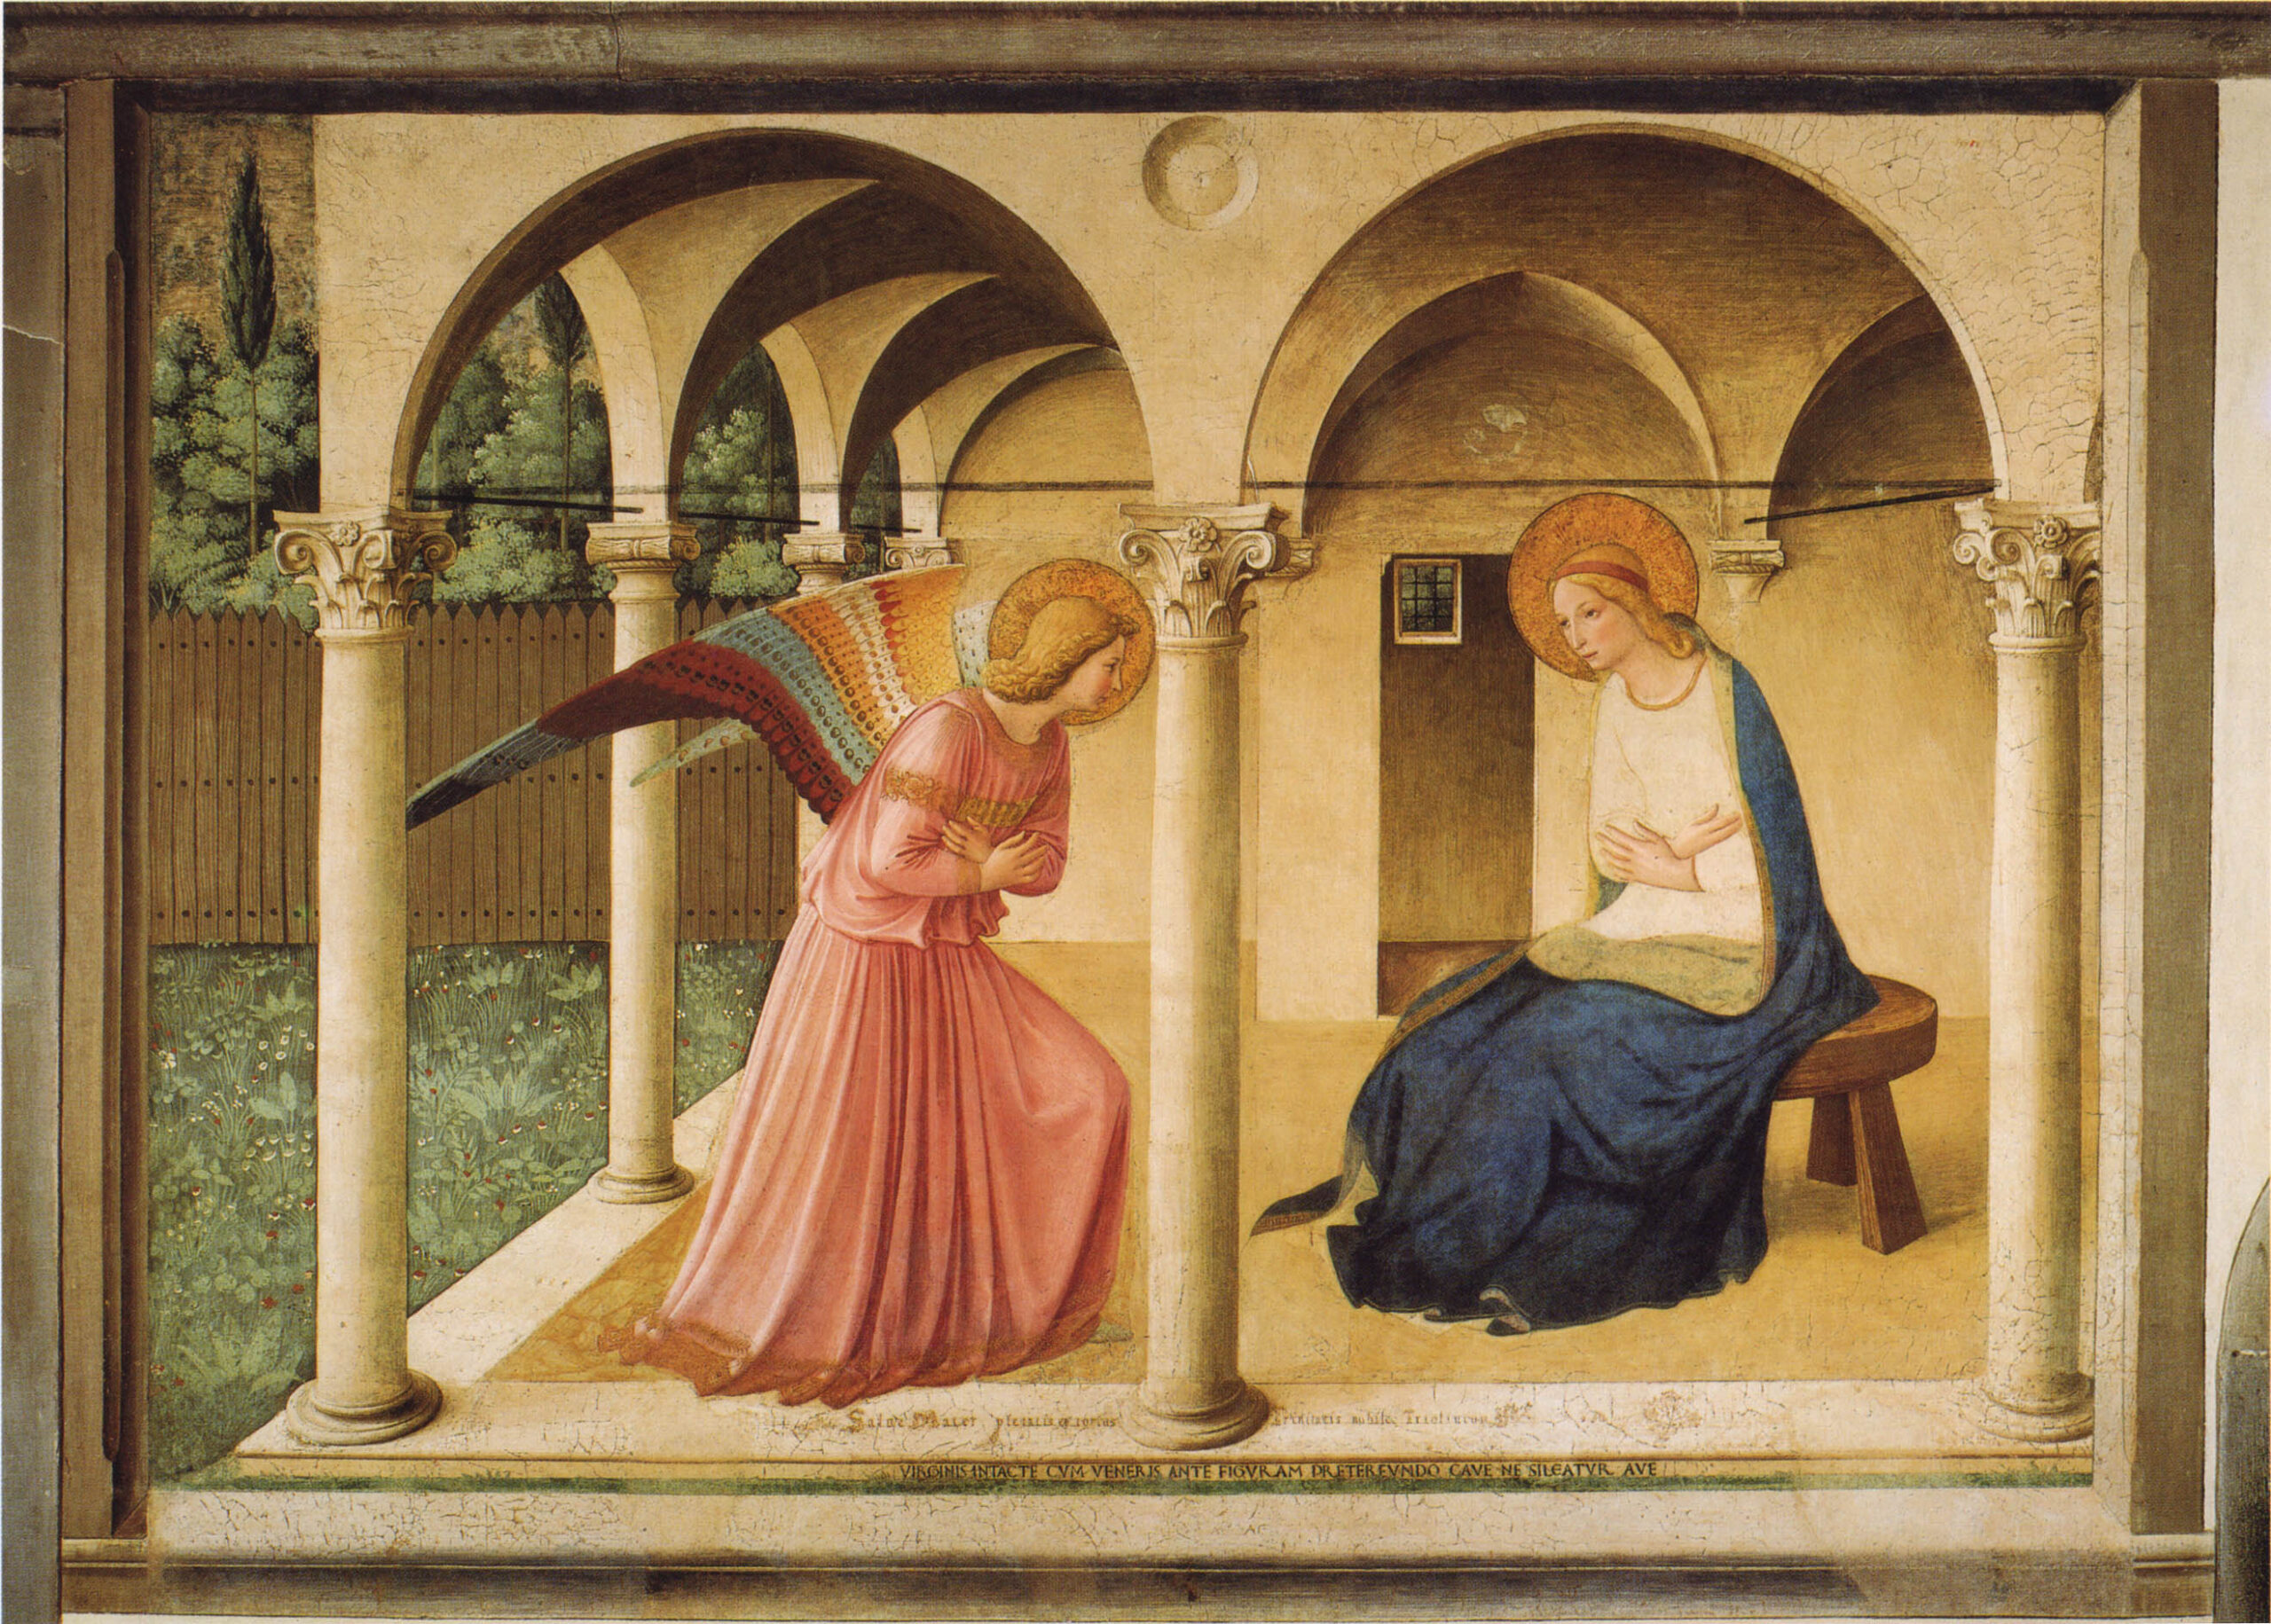 March 25 marks the Feast of the Annunciation, commemorating Gabriel’s